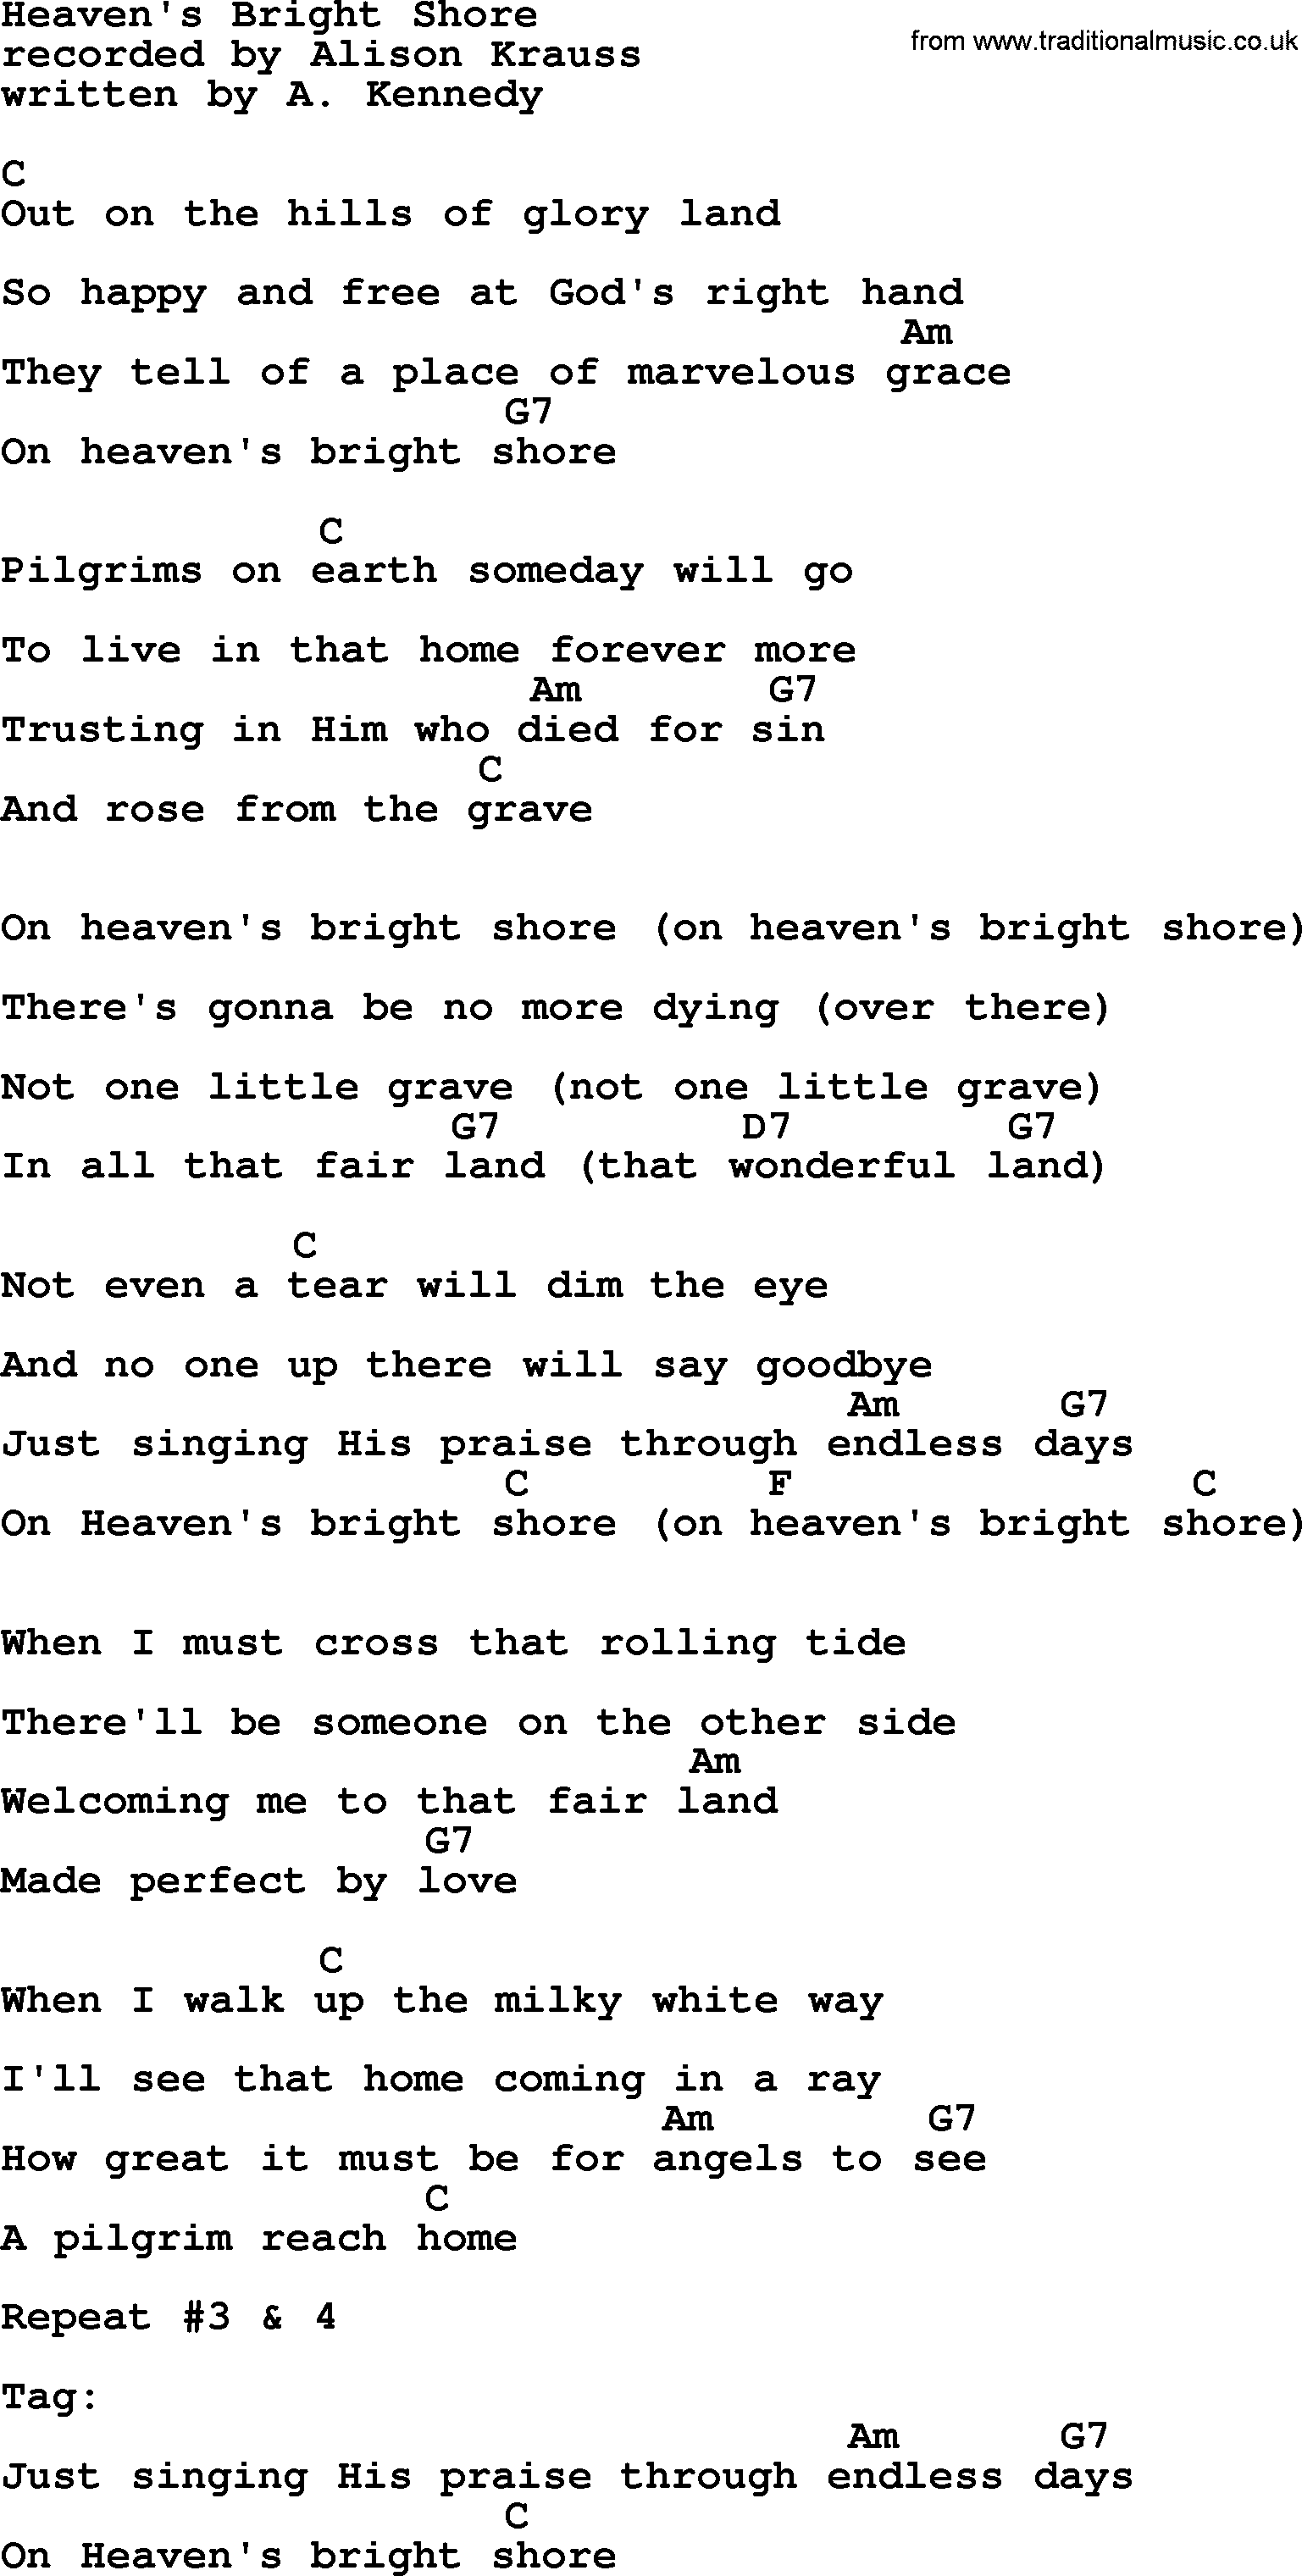 Bluegrass song: Heaven's Bright Shore 2, lyrics and chords